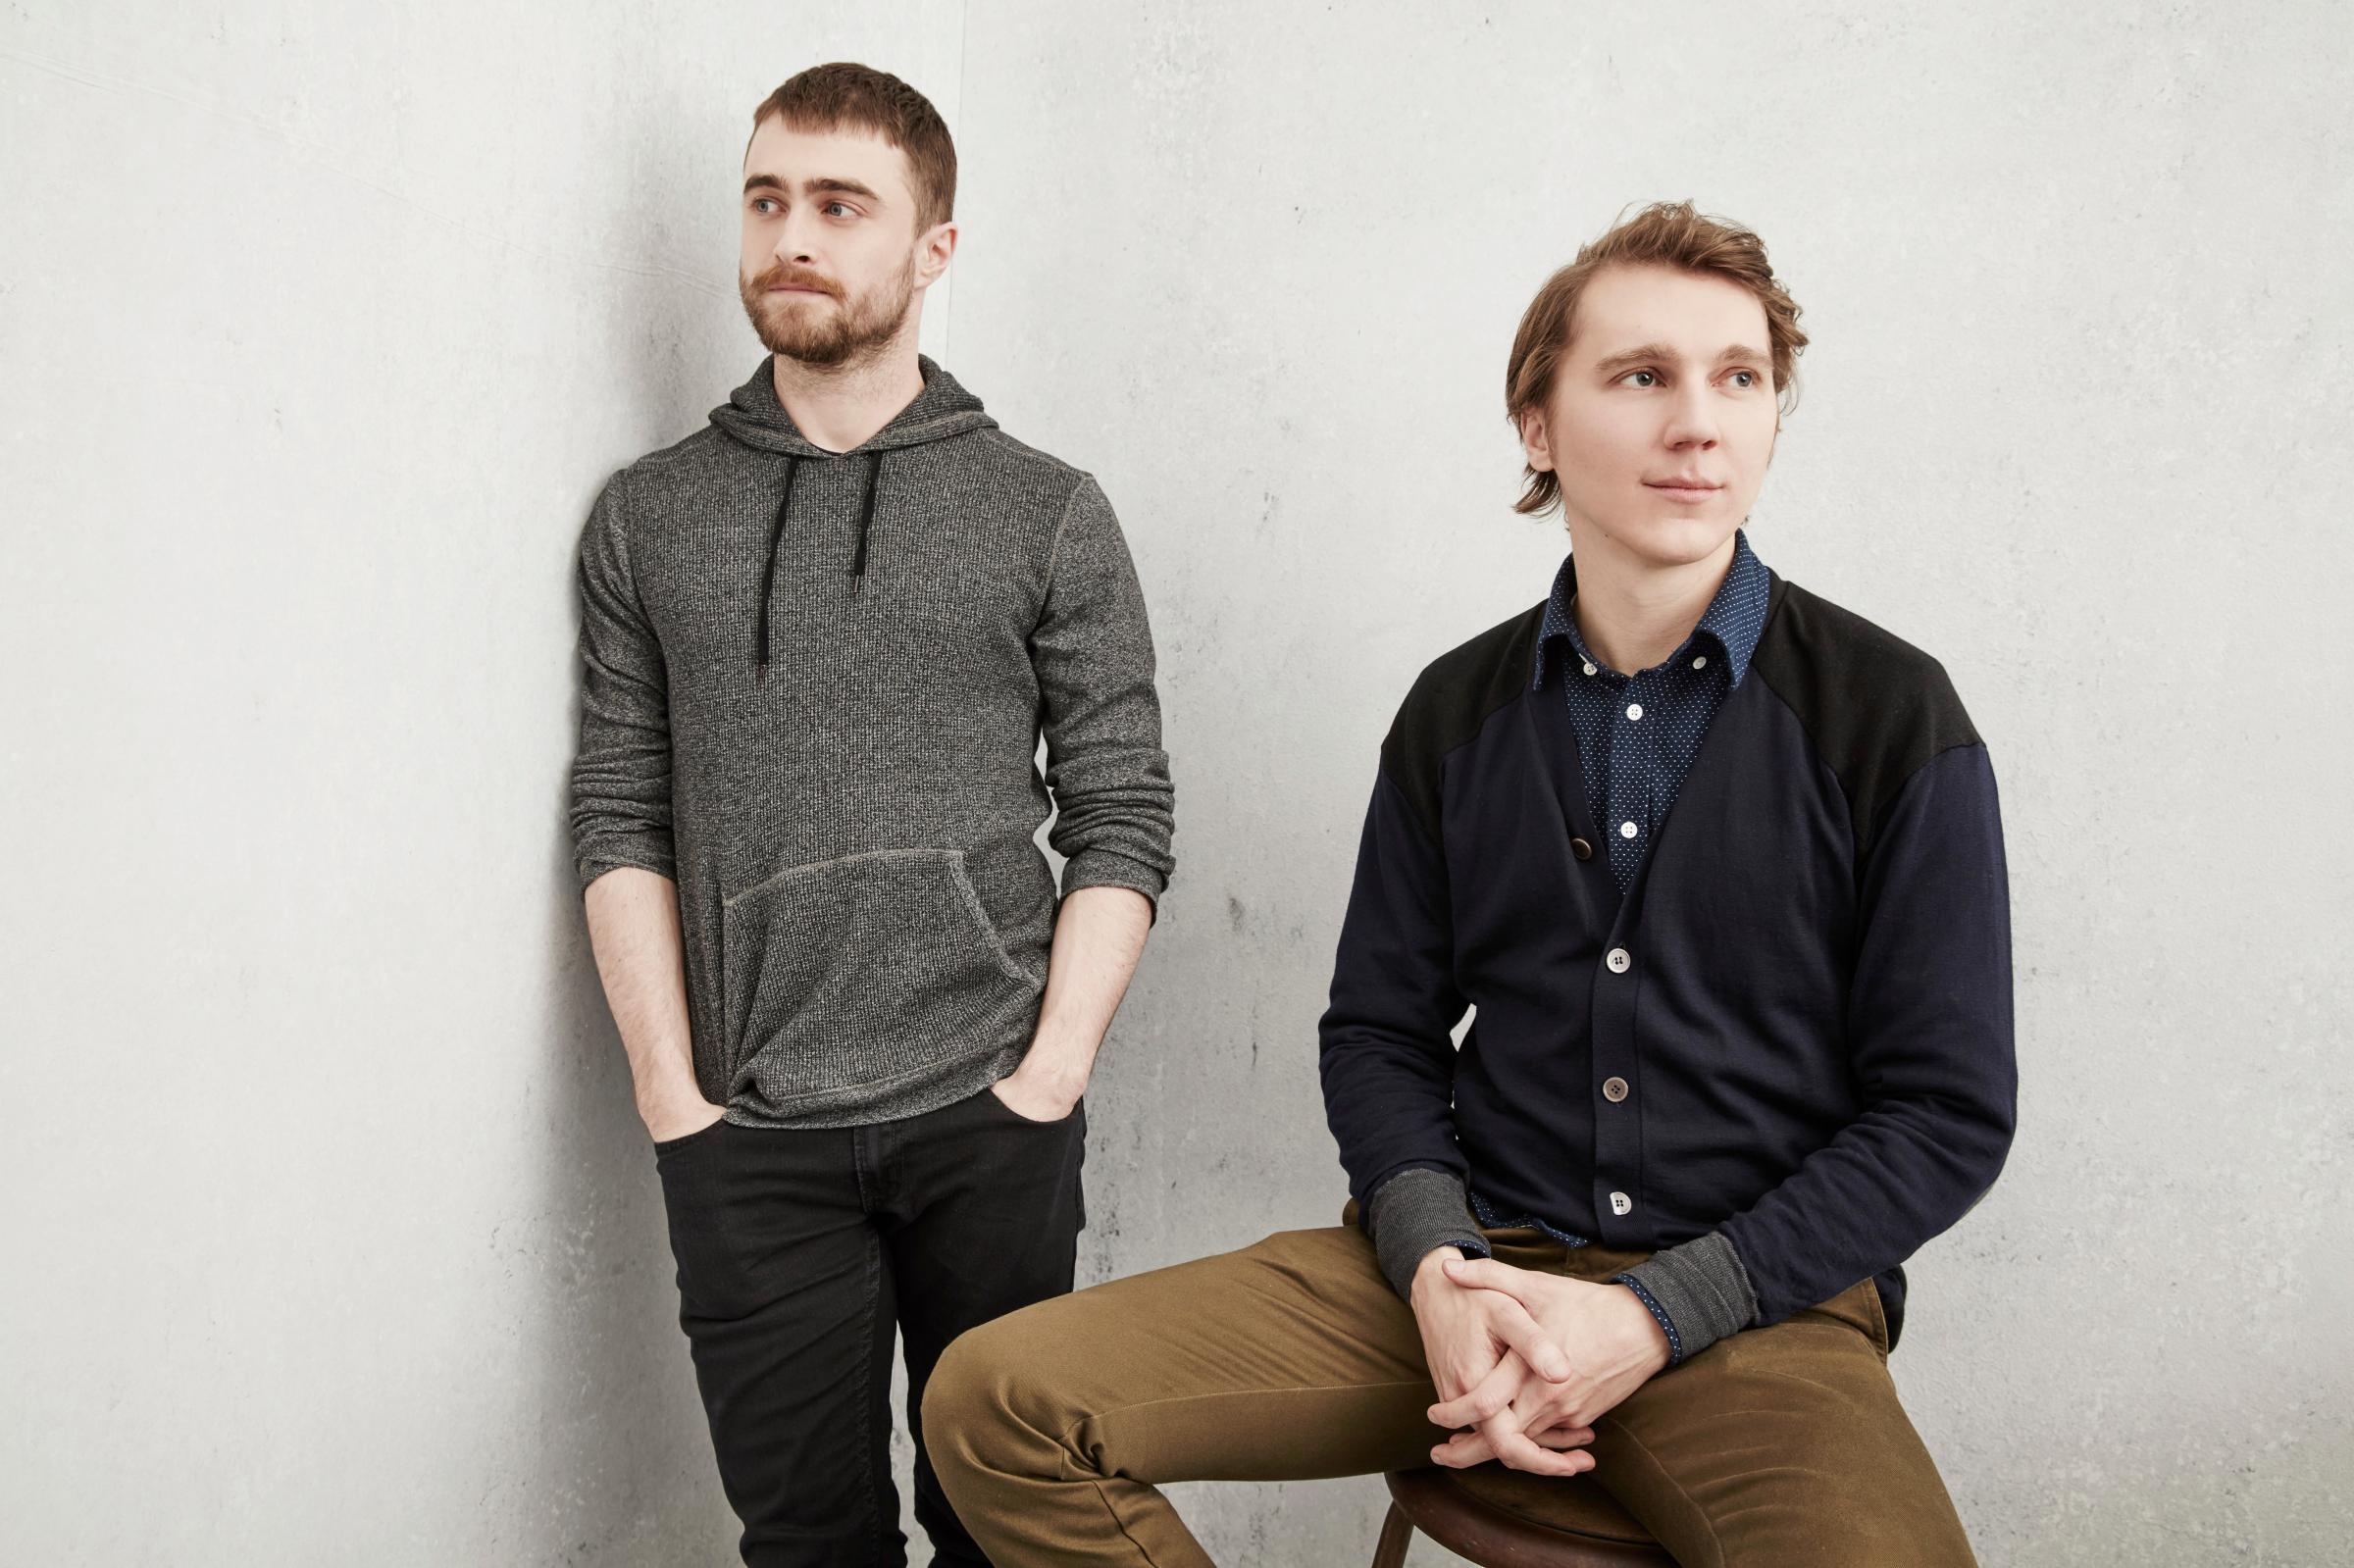 Daniel Radcliffe and Paul Dano of 'Swiss Army Man' pose at the 2016 Sundance Film Festival Getty Images Portrait Studio on January 22, 2016 in Park City, Utah